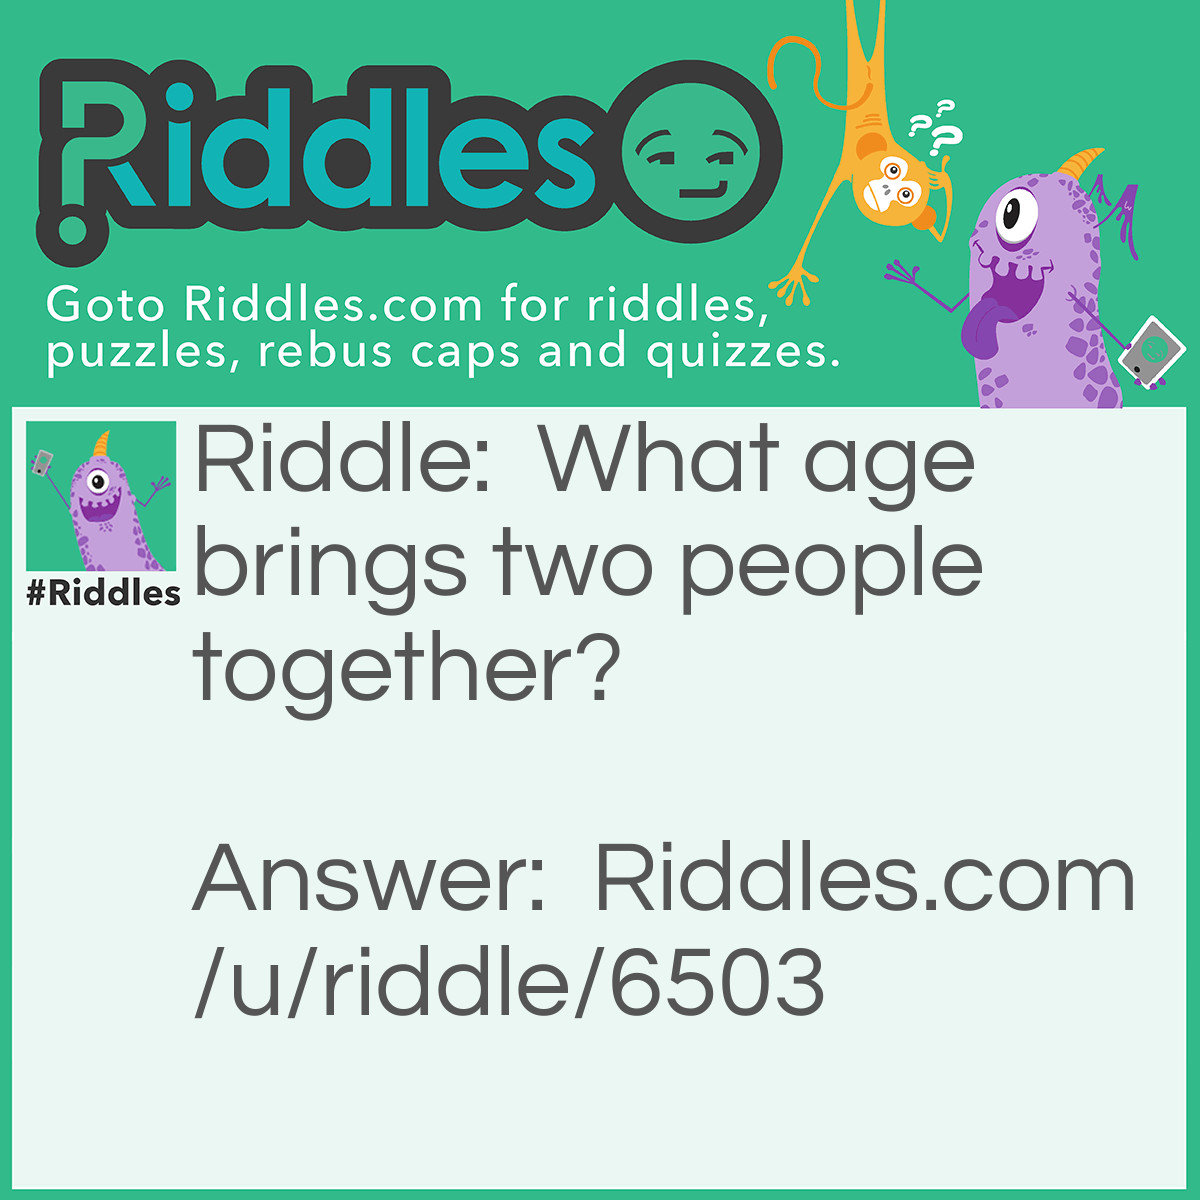 Riddle: What age brings two people together? Answer: The MARRY age (marriage).